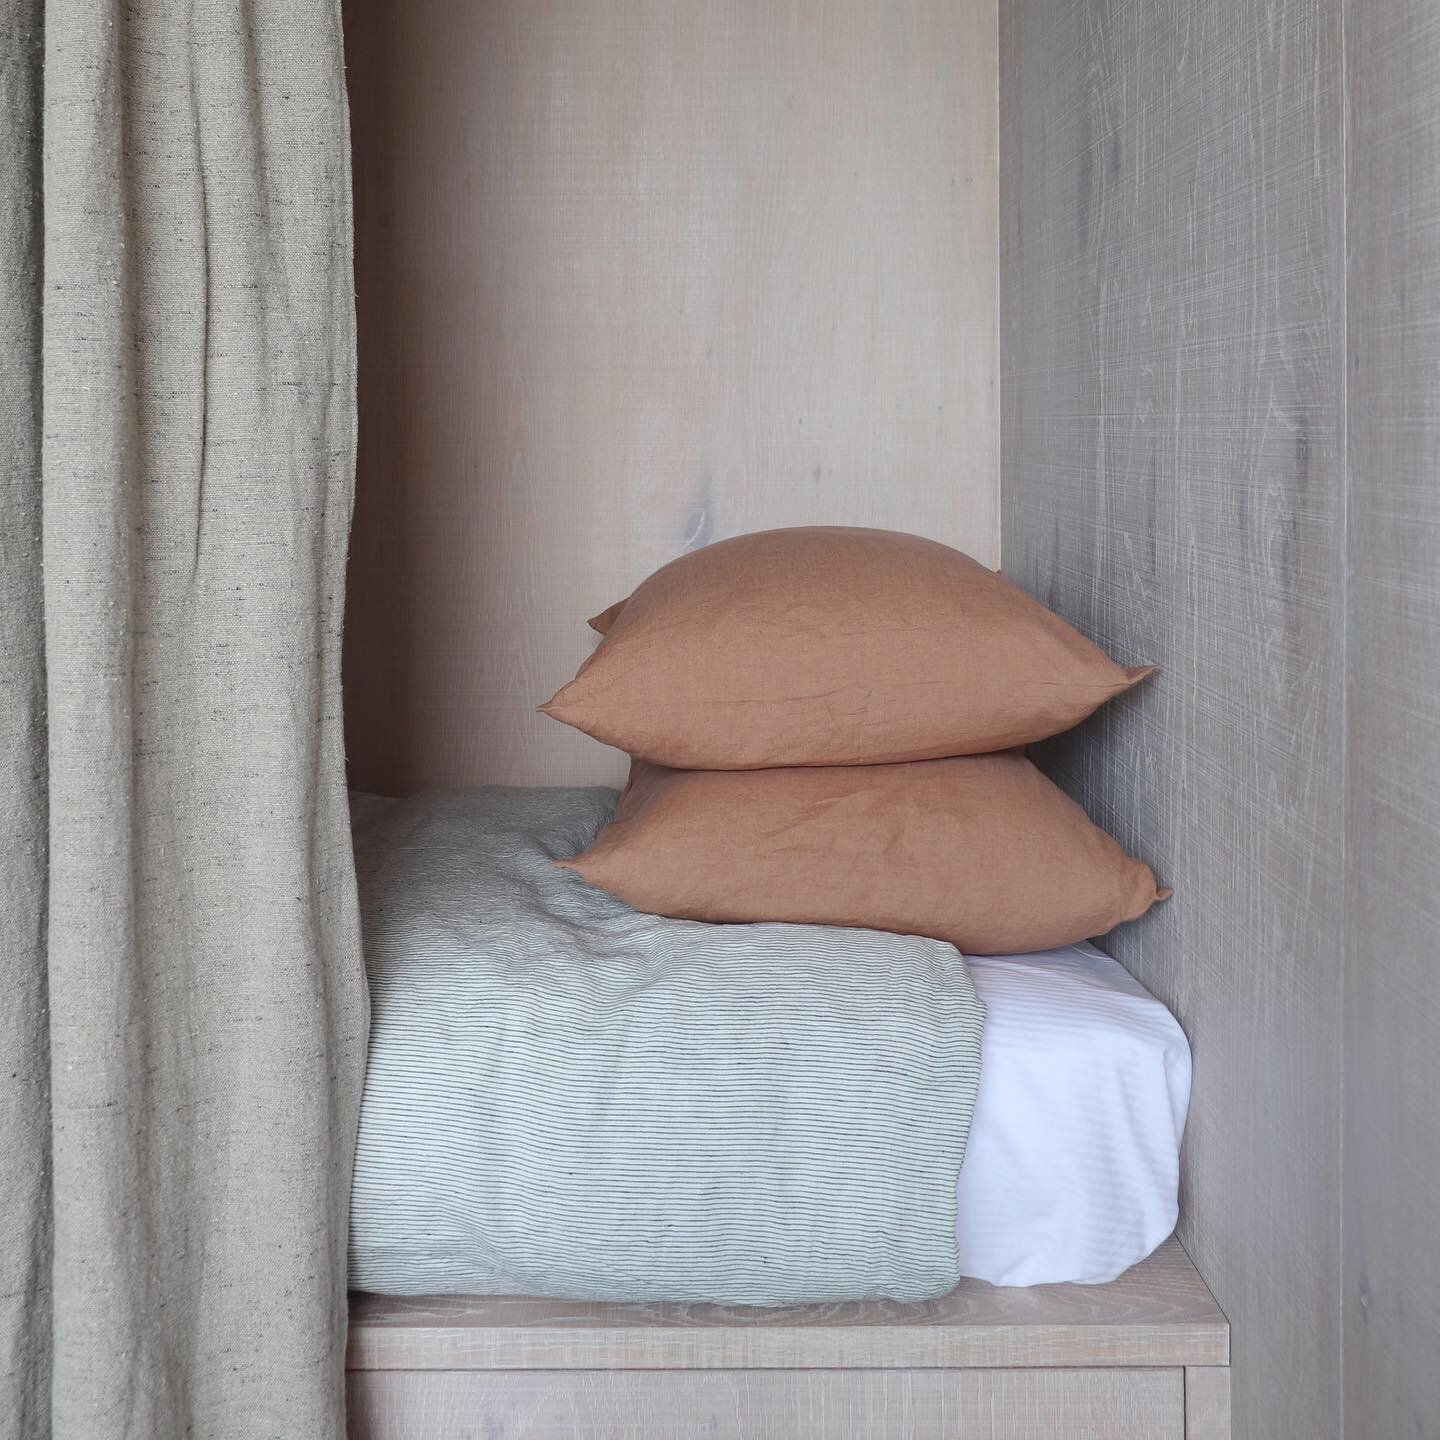 &lsquo;Te Mania&rsquo; - a beautiful project I recently worked on.

This gorgeous double sided linen curtain gave the textural balance we were looking for against the timber walls.

Not to mention the super cool linen bedding from one of my faves - @